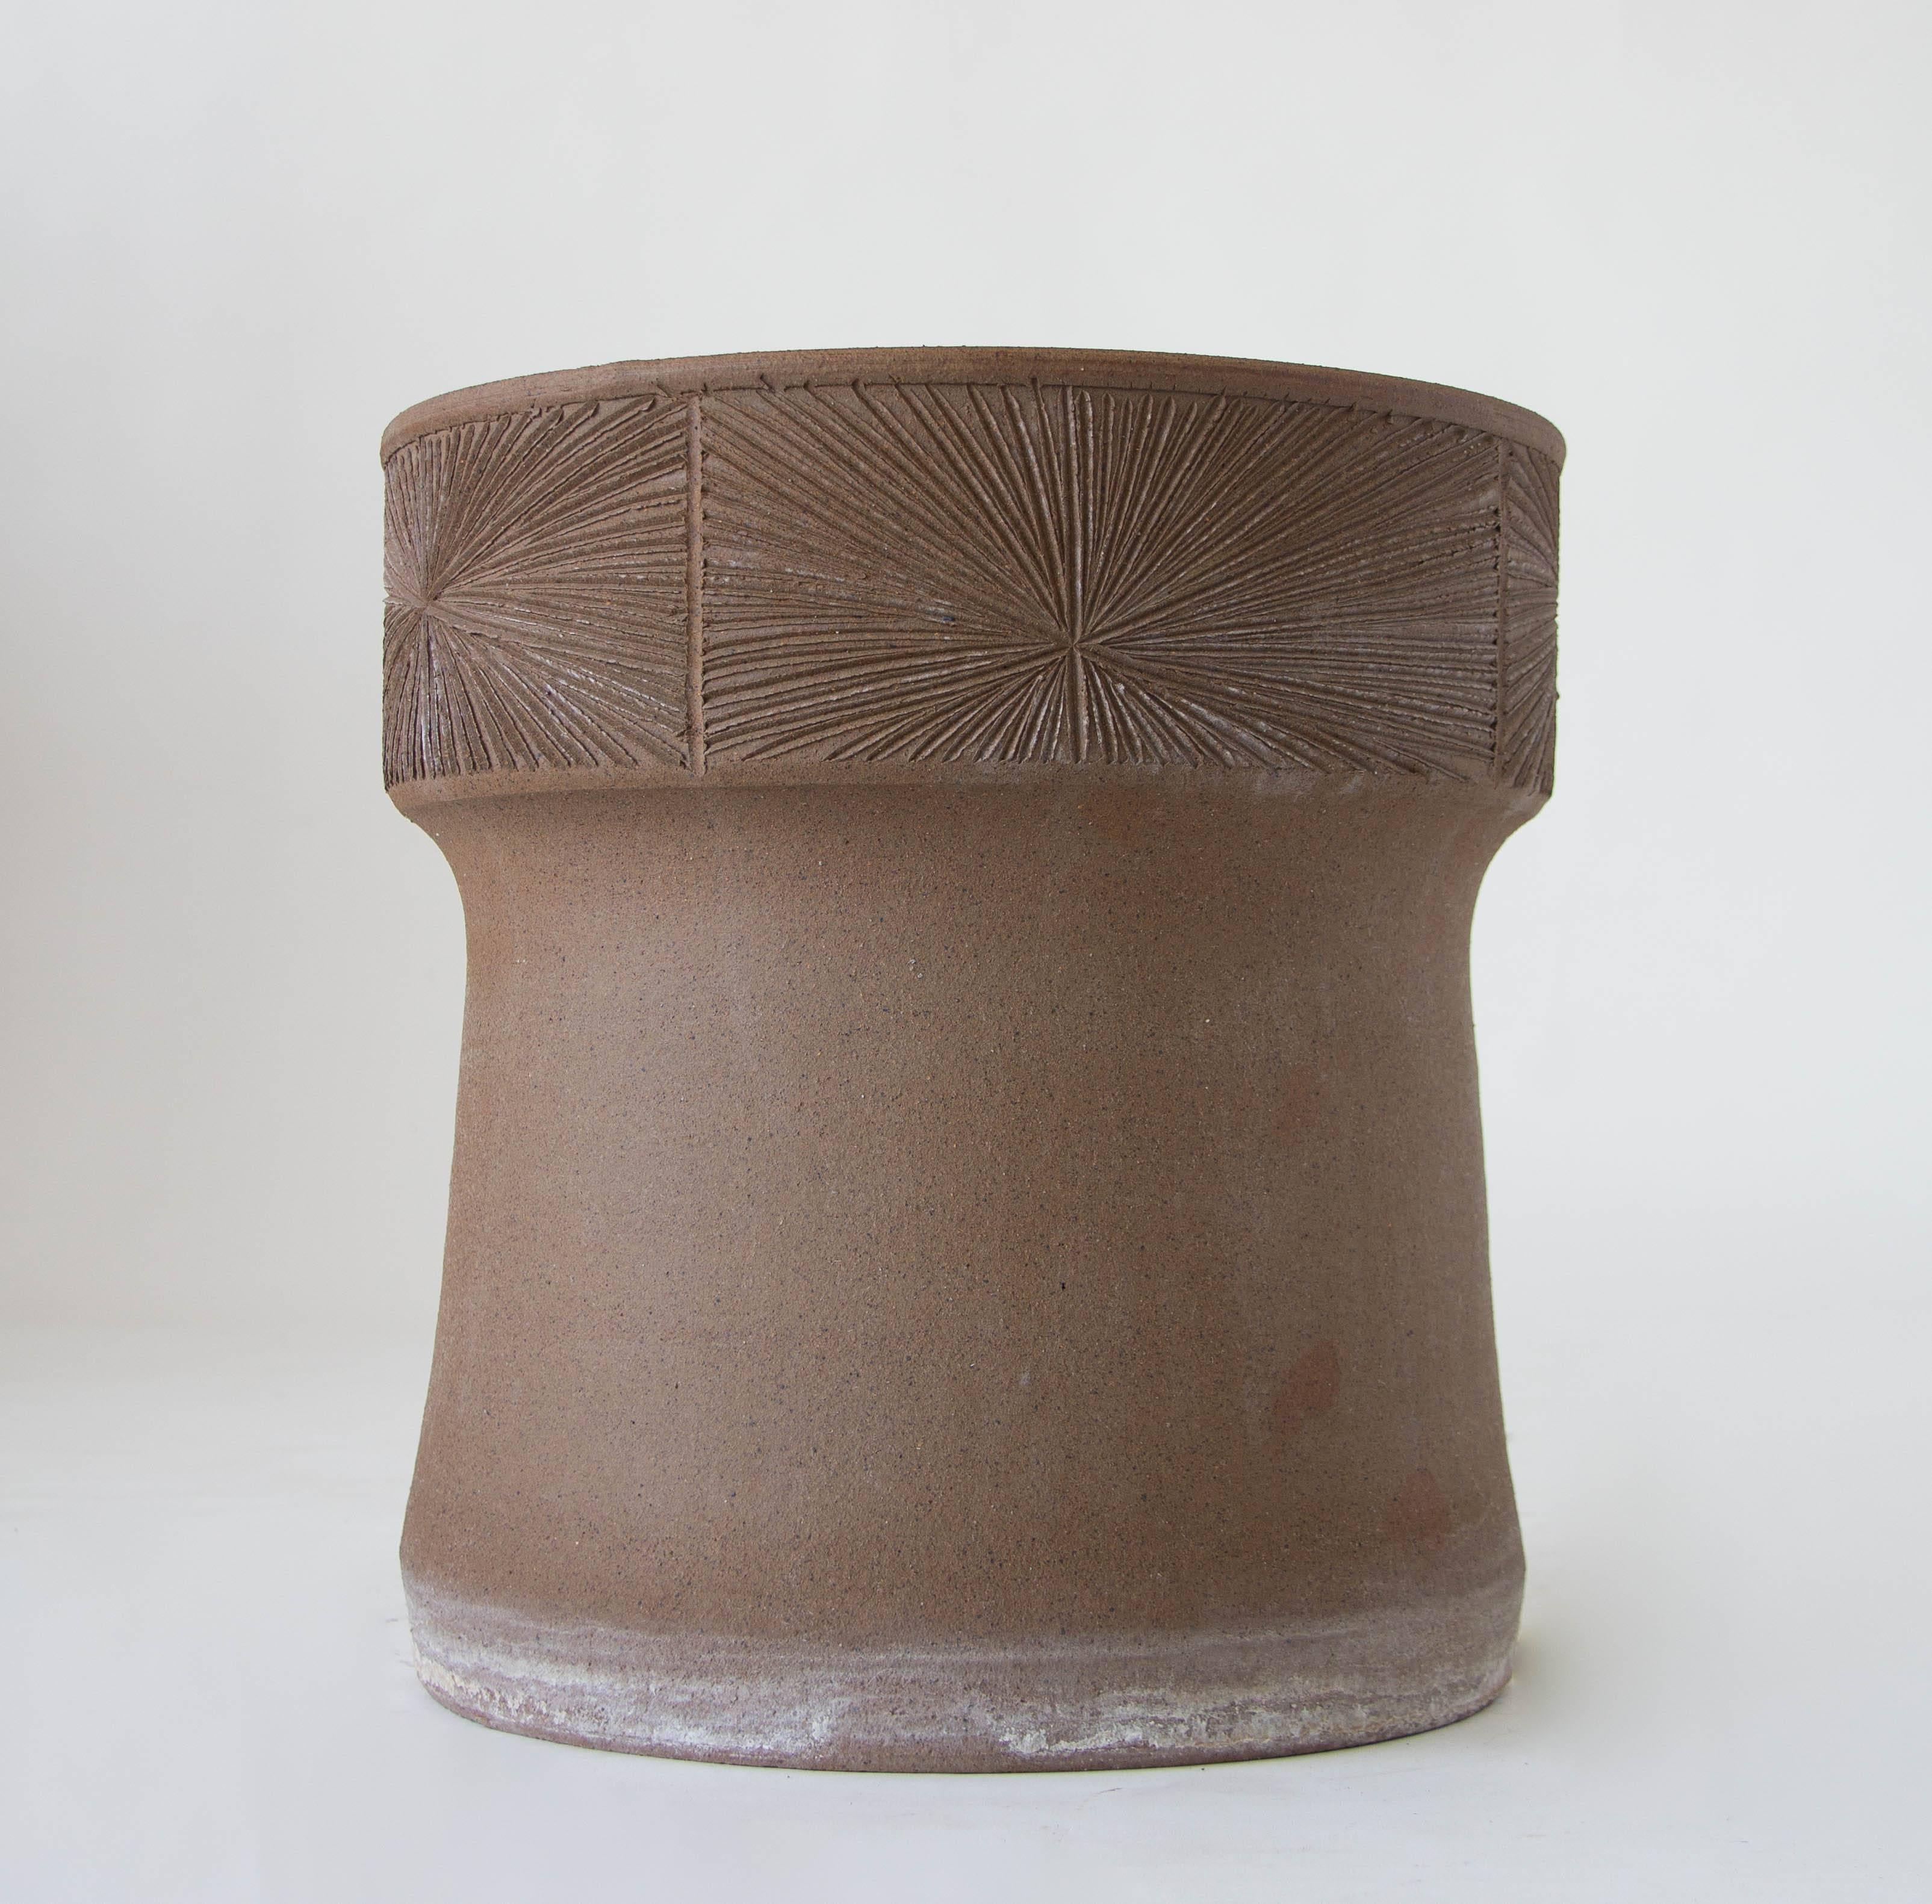 A stoneware planter Robert Maxwell 1970s collaboration Earthgender. The planter has plain sides flared towards the foot, and a wide lip with an incised sunburst pattern. The interior of the planter is glazed. 

Condition: Excellent vintage